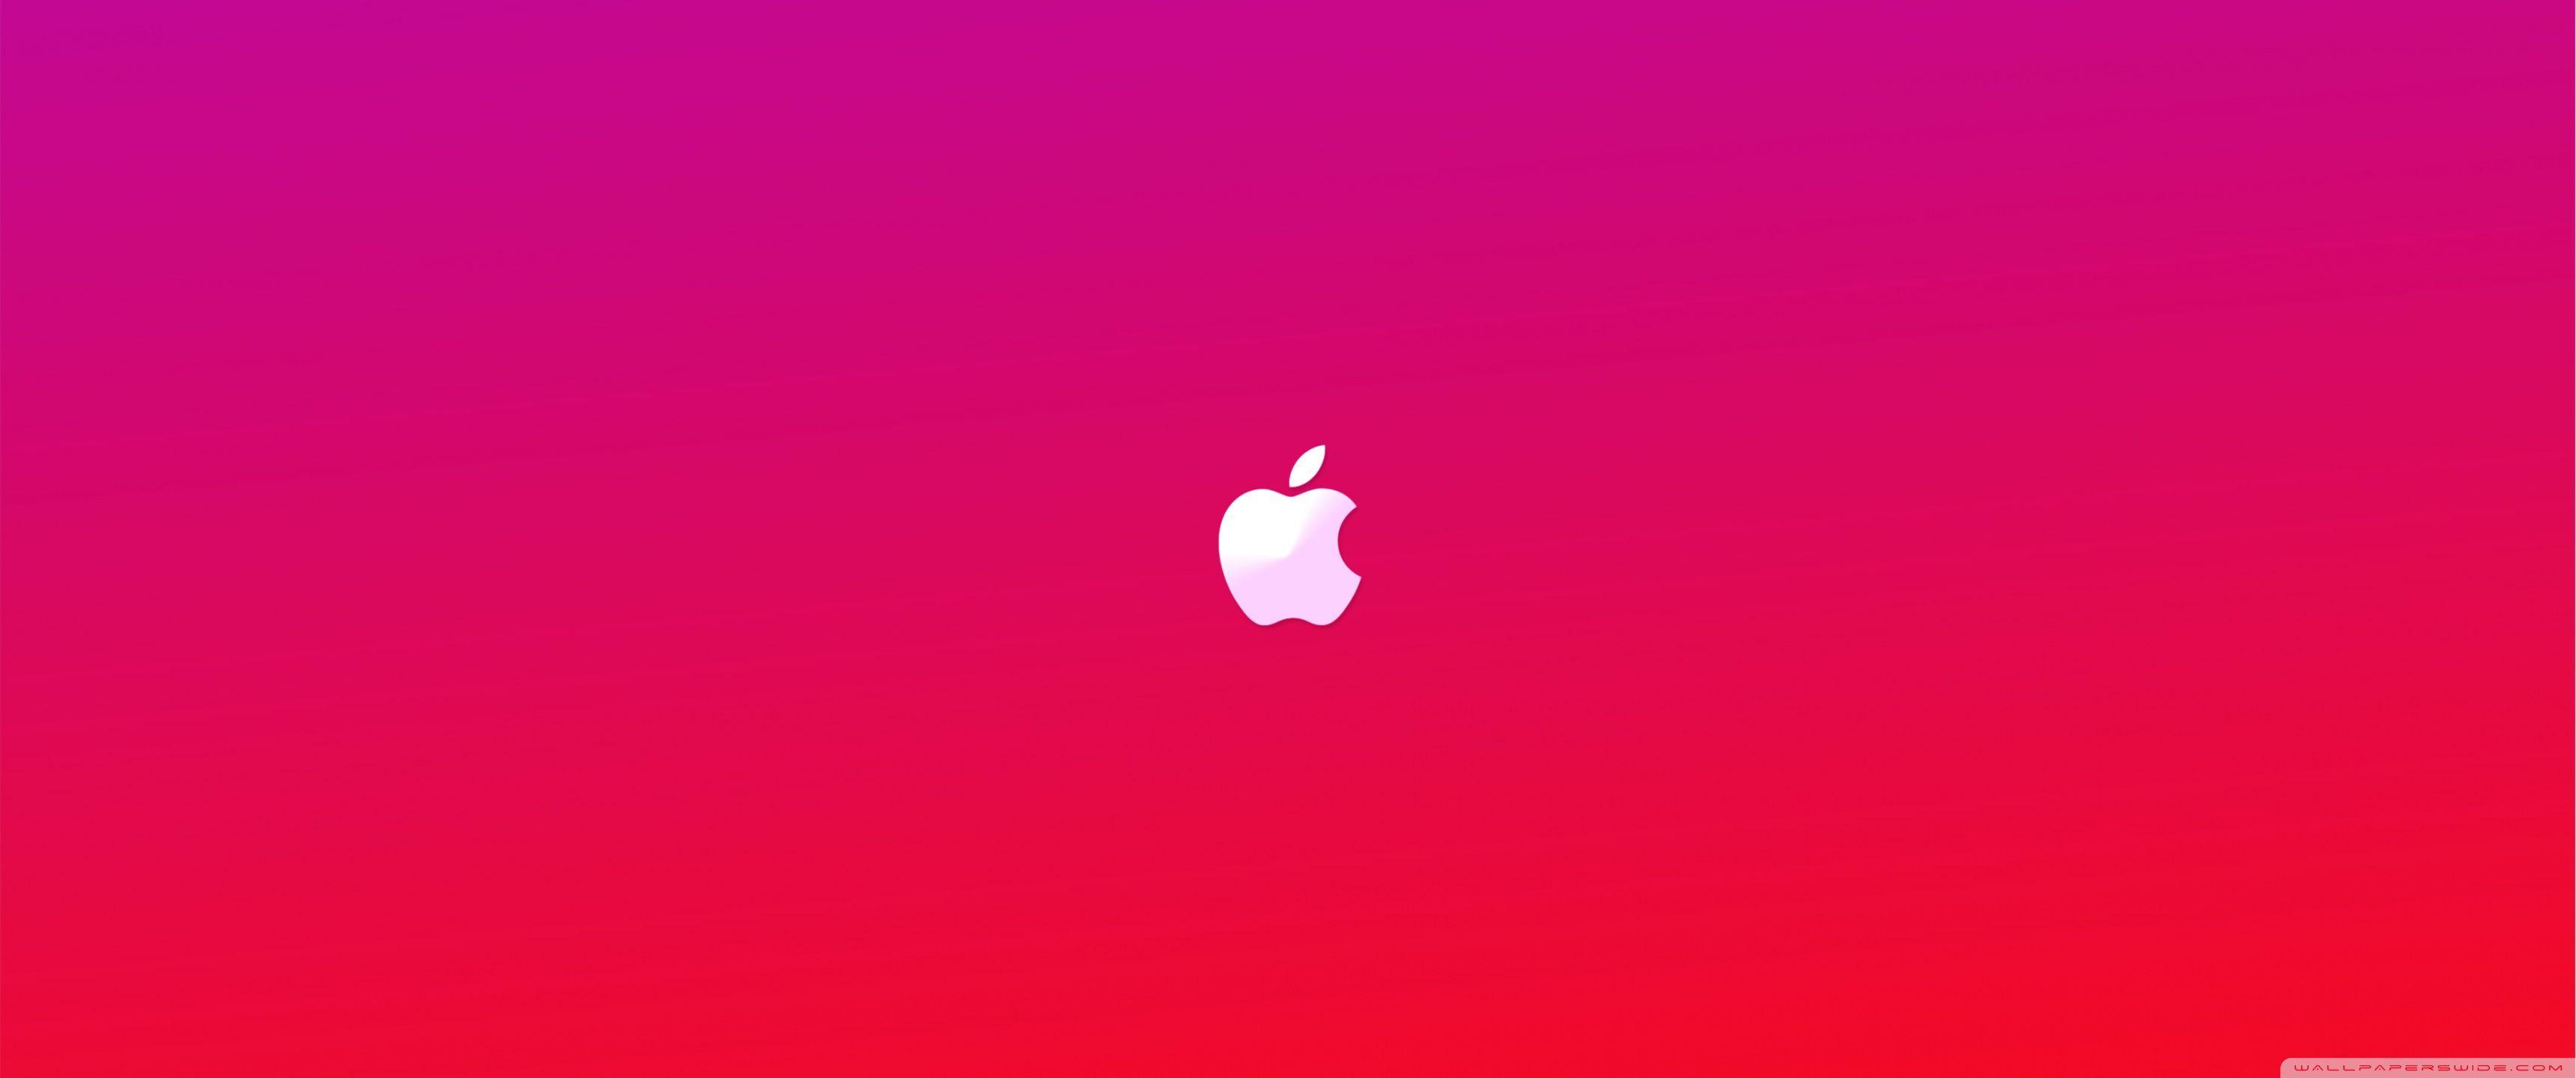 Pink and Black Apple Wallpapers - Top Free Pink and Black Apple ...